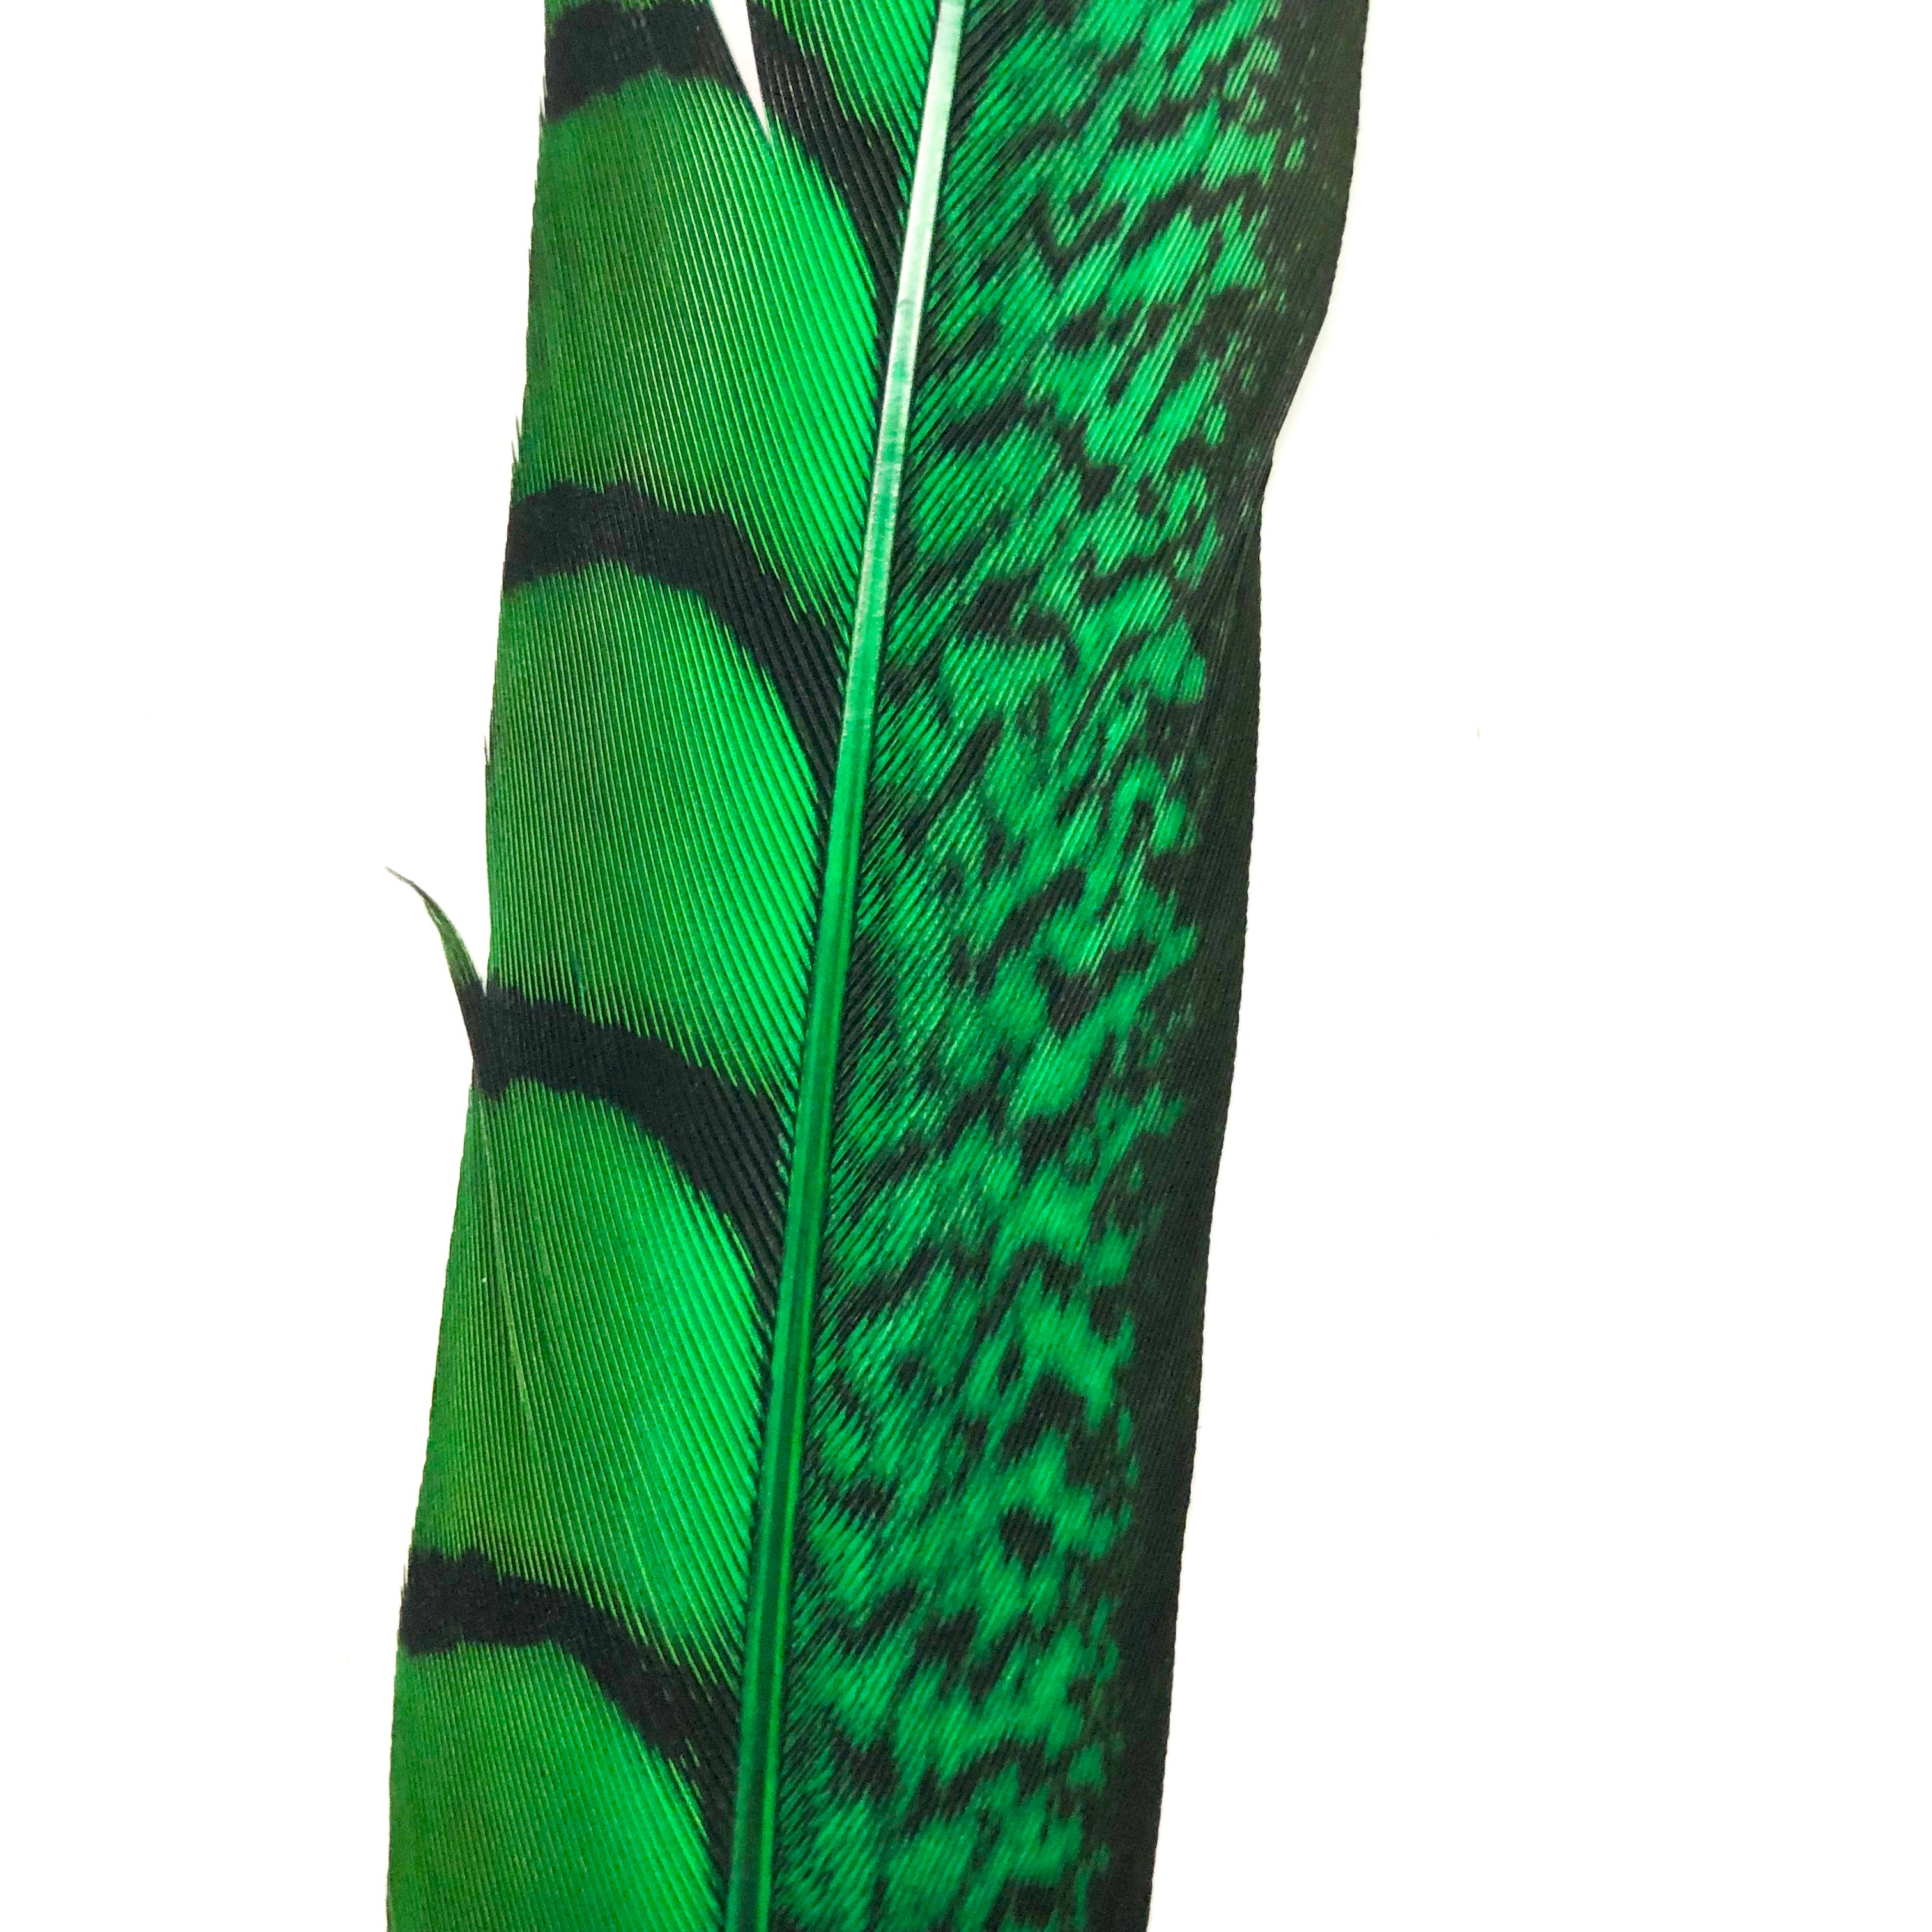 10" to 20" Lady Amherst Pheasant Side Tail Feather - Green ((SECONDS))